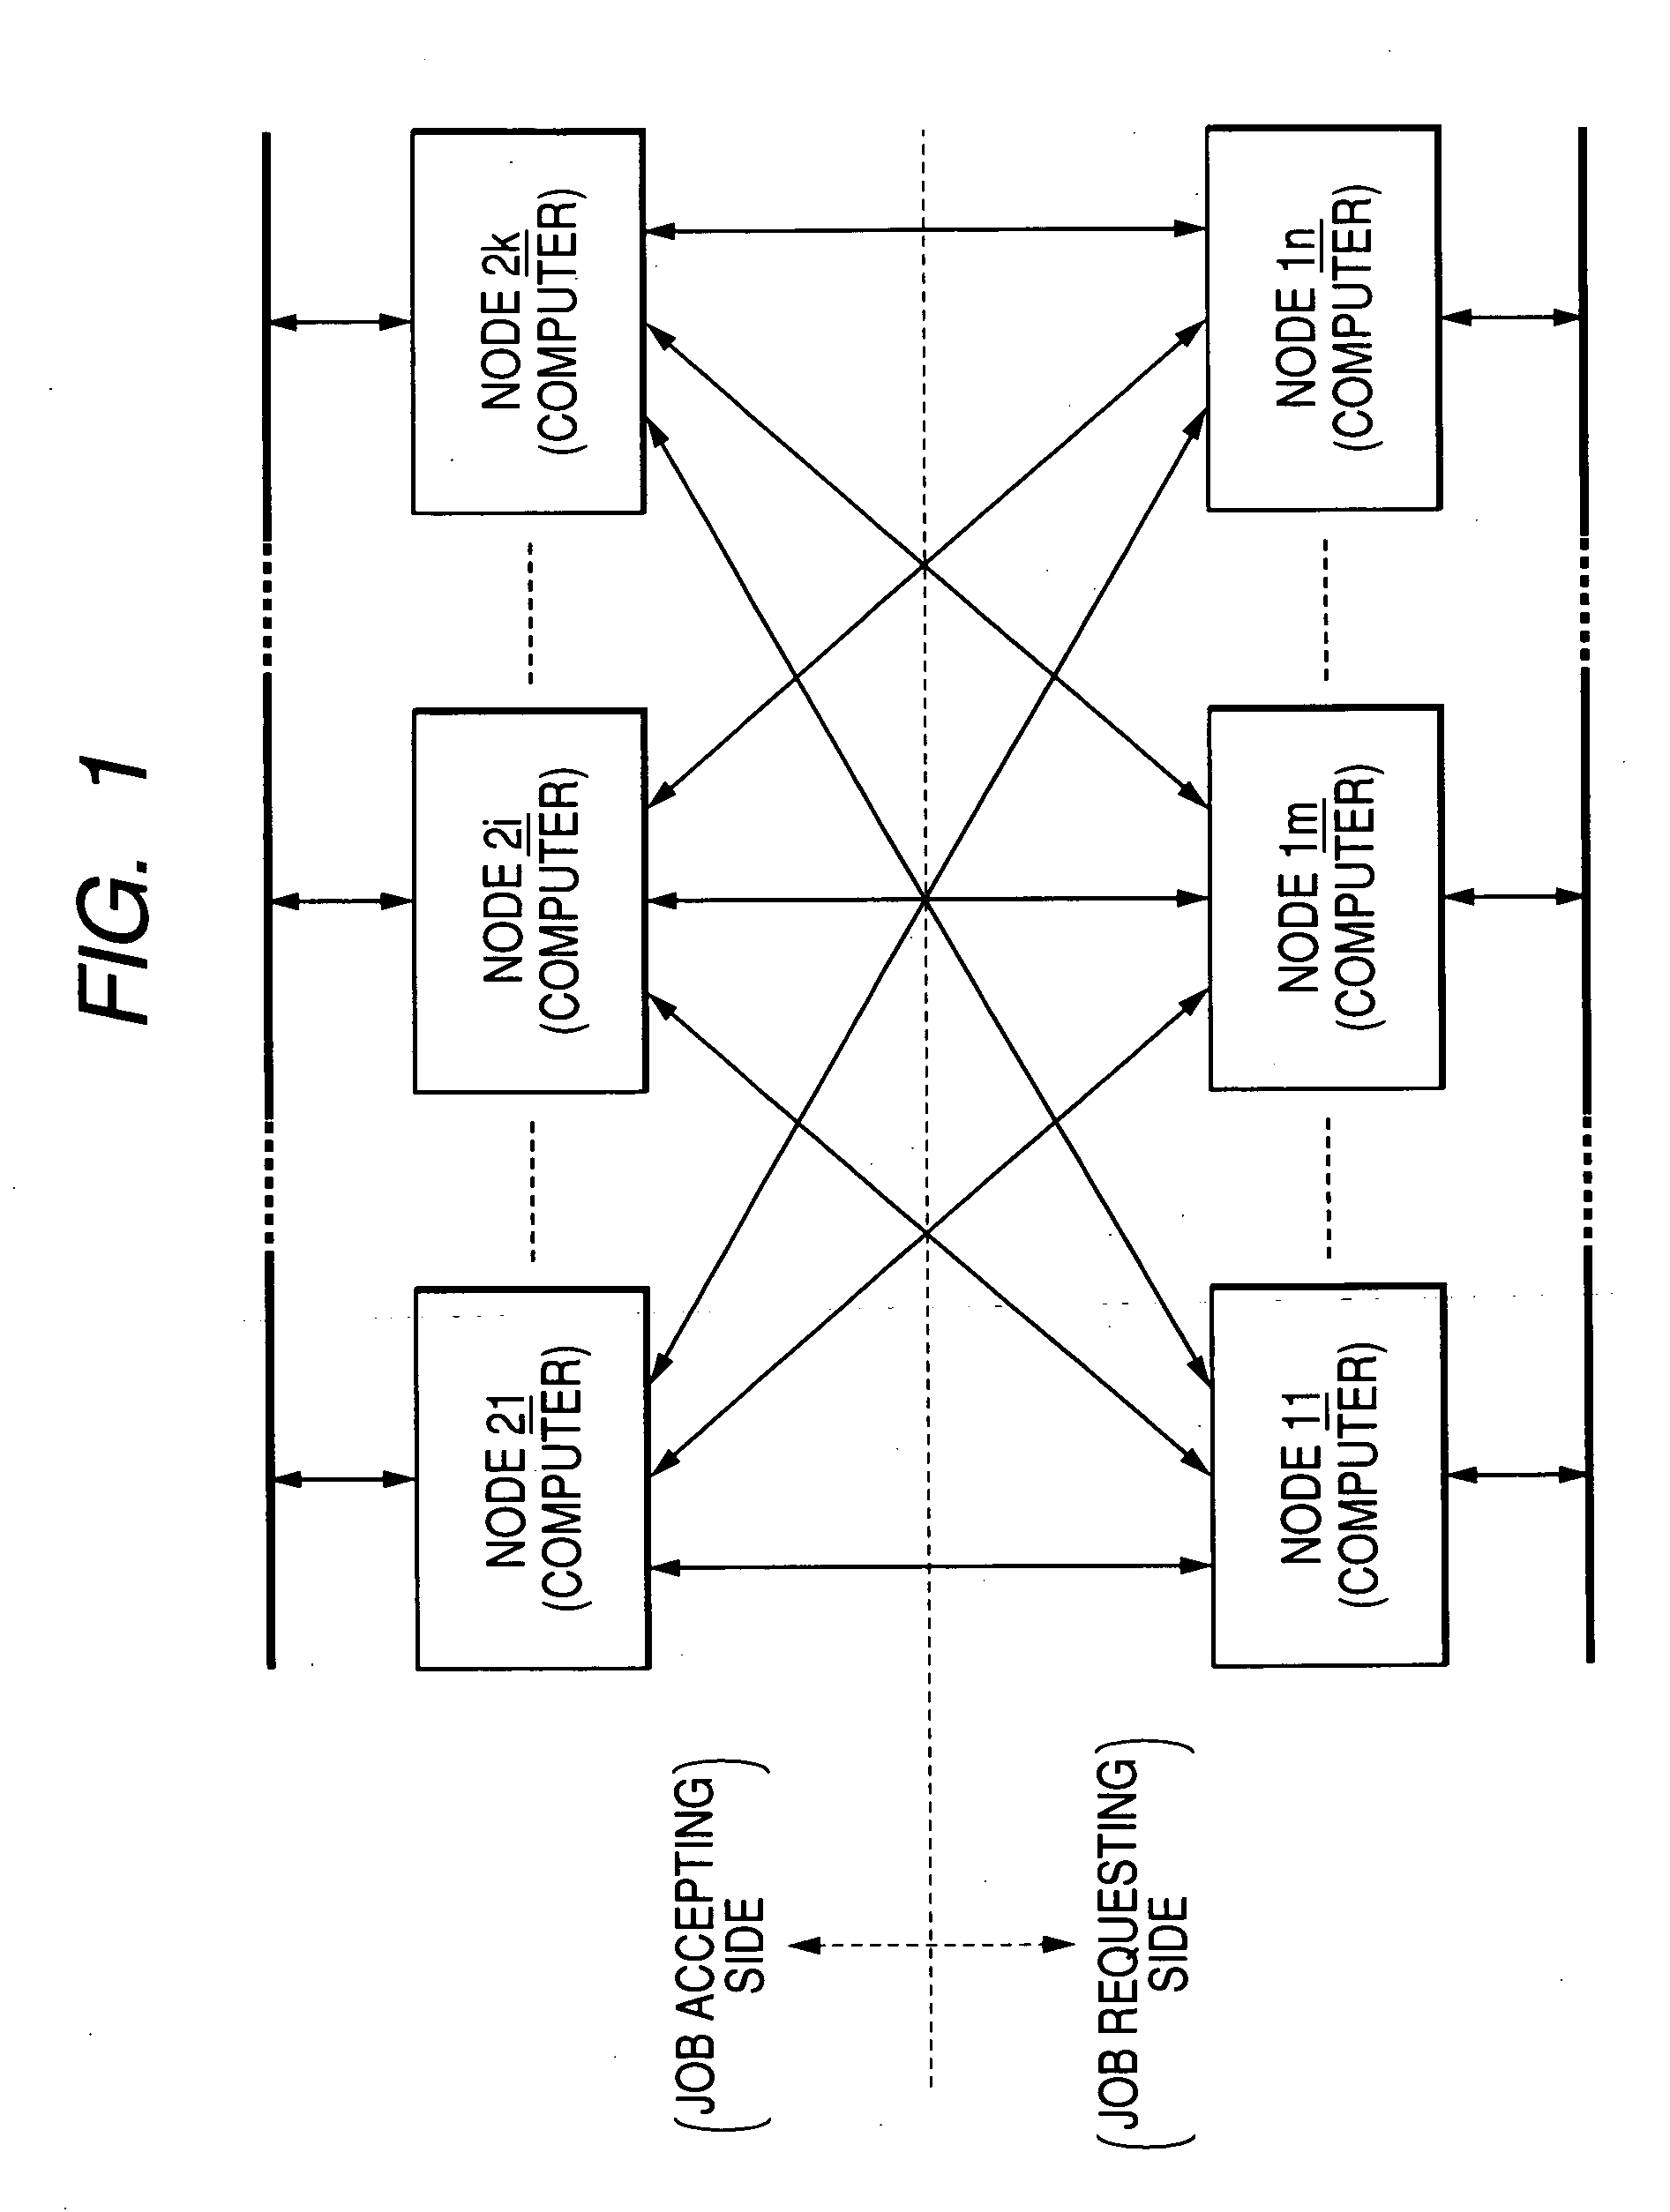 Image processing system for volume rendering